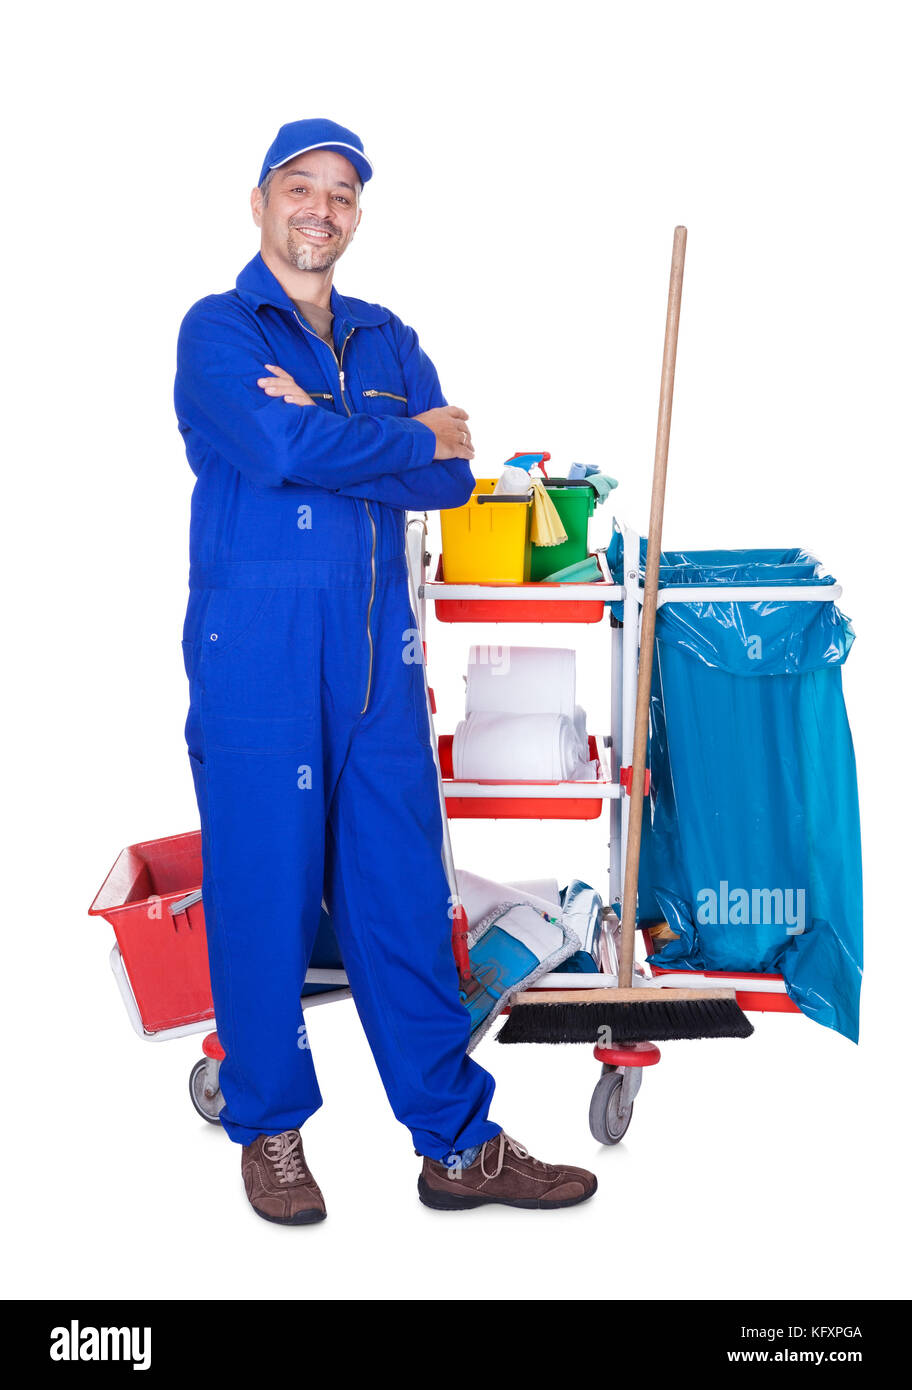 Portrait Of Smiling Cleaner Isolated On White Background Stock Photo